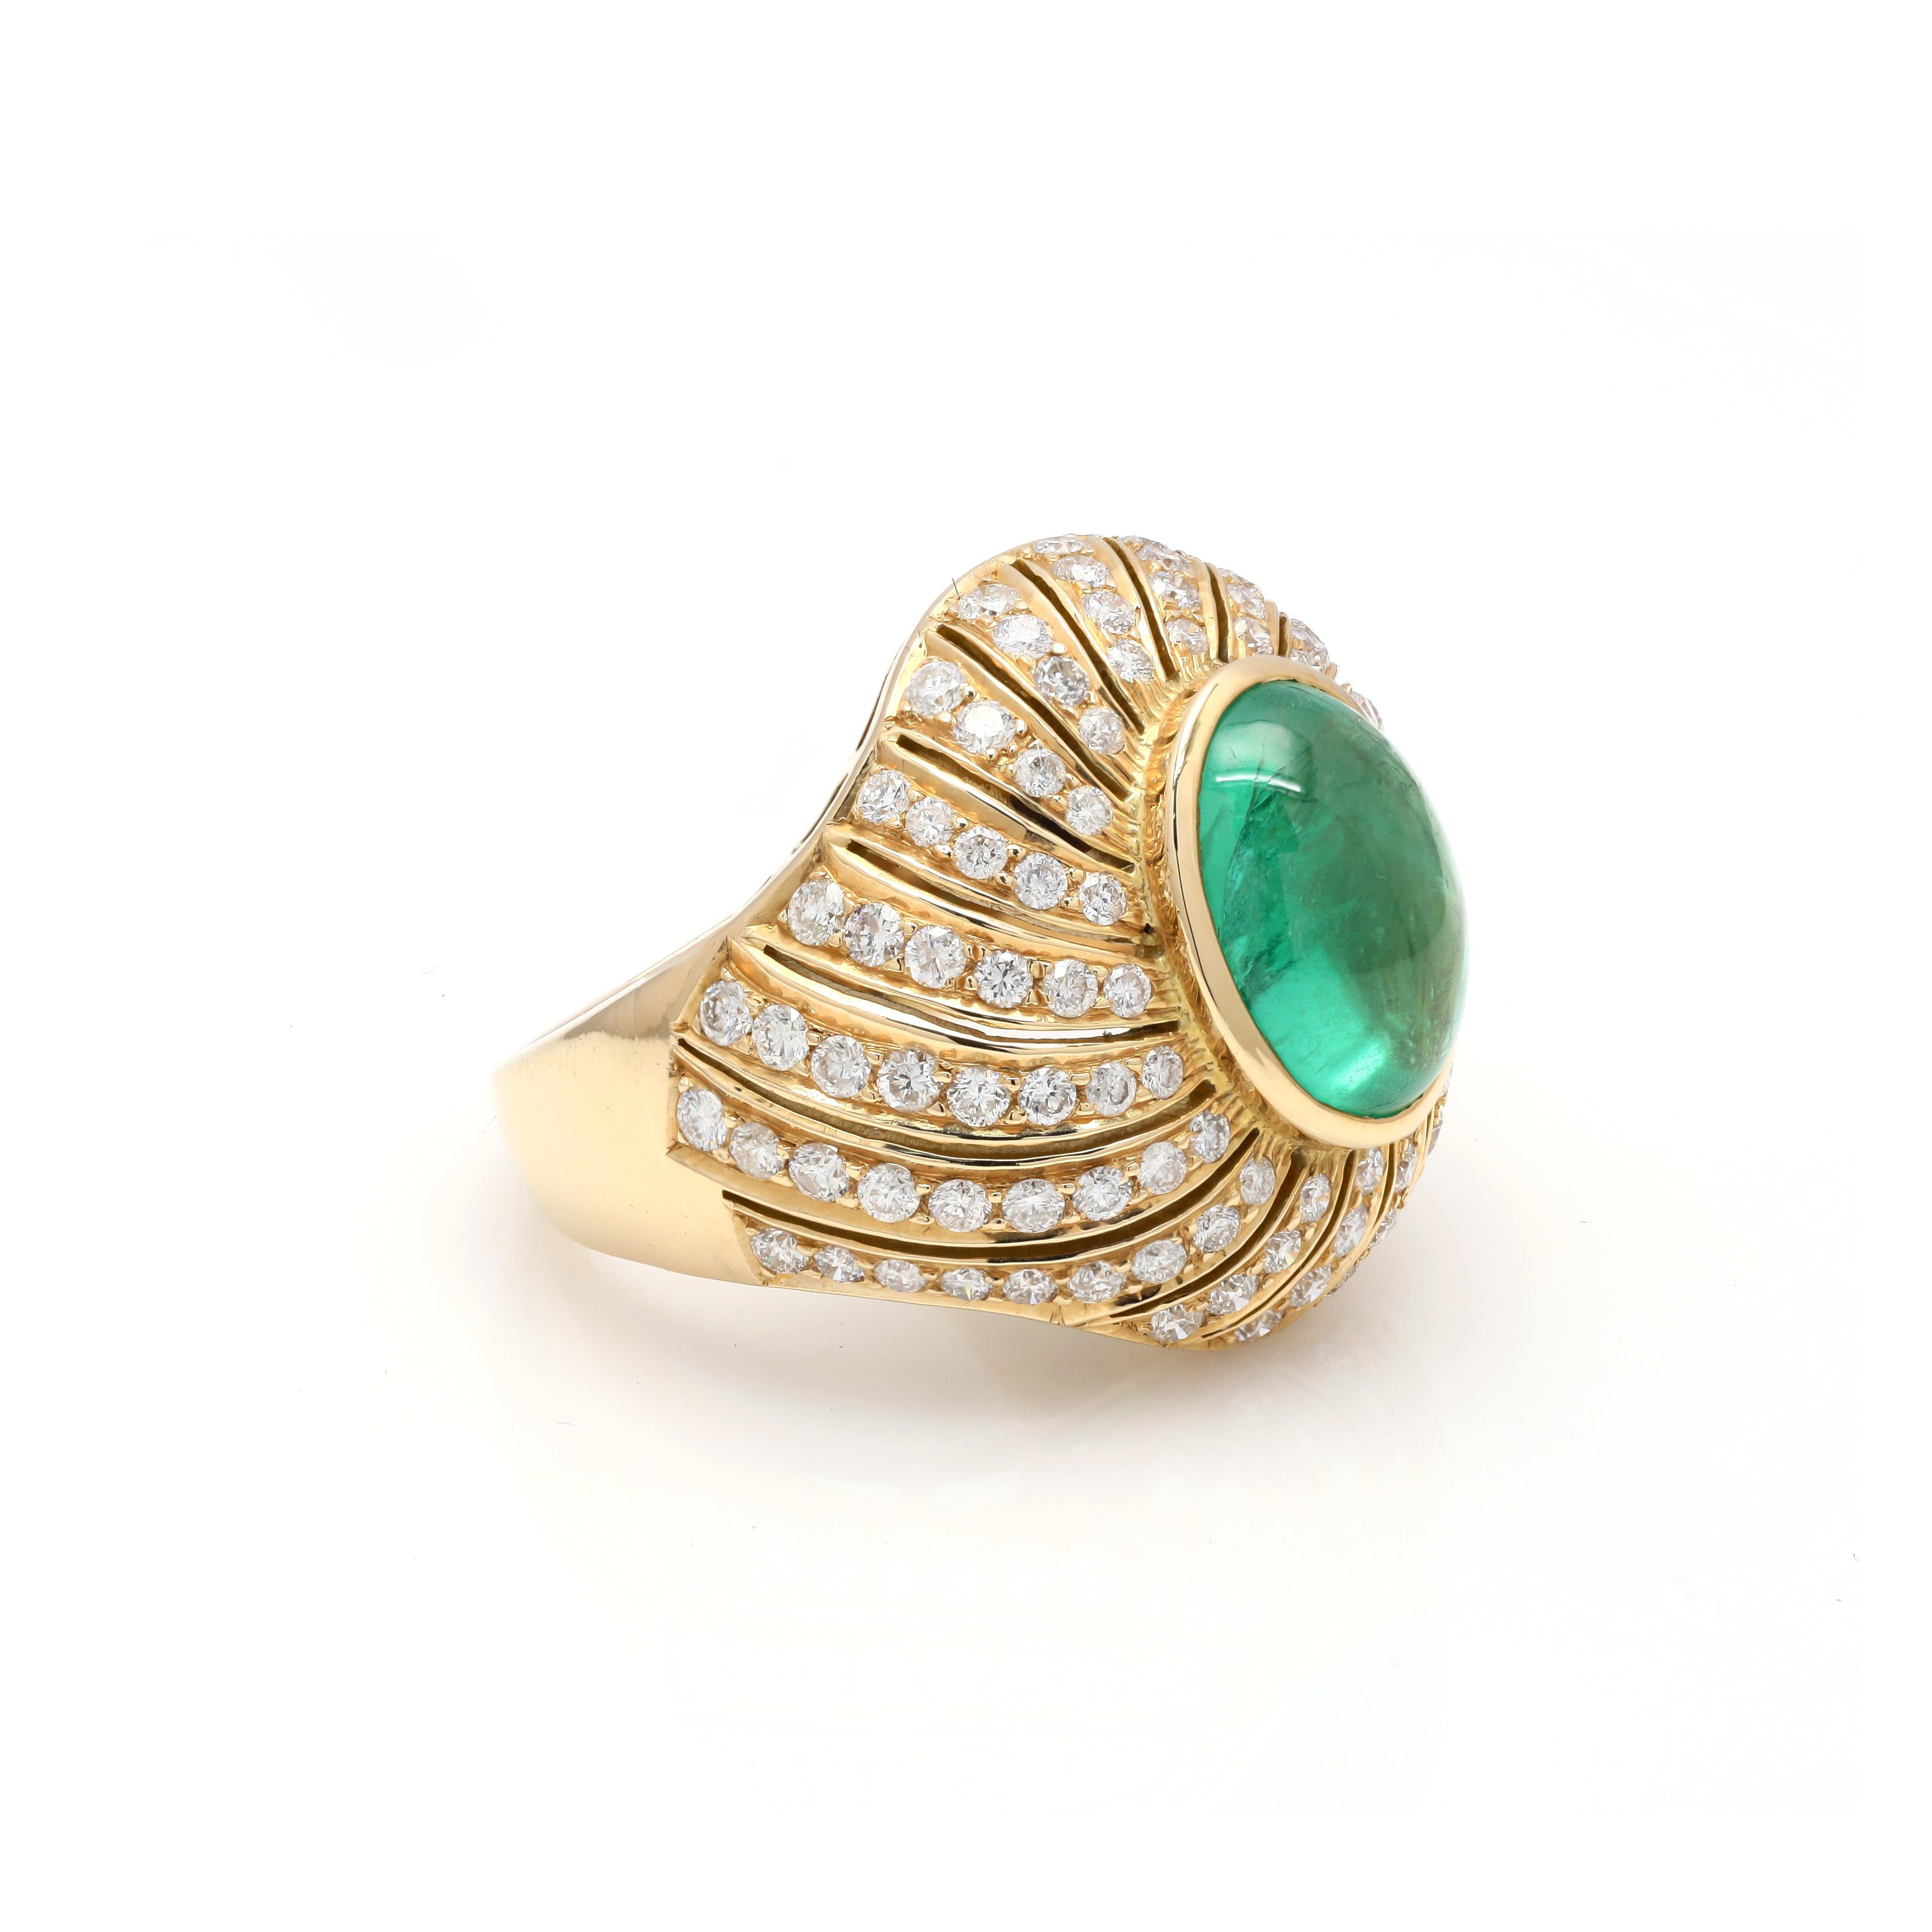 For Sale:  Mesmerizing 4.38 Carat Emerald Cocktail Ring with Diamonds in 18K Yellow Gold 3